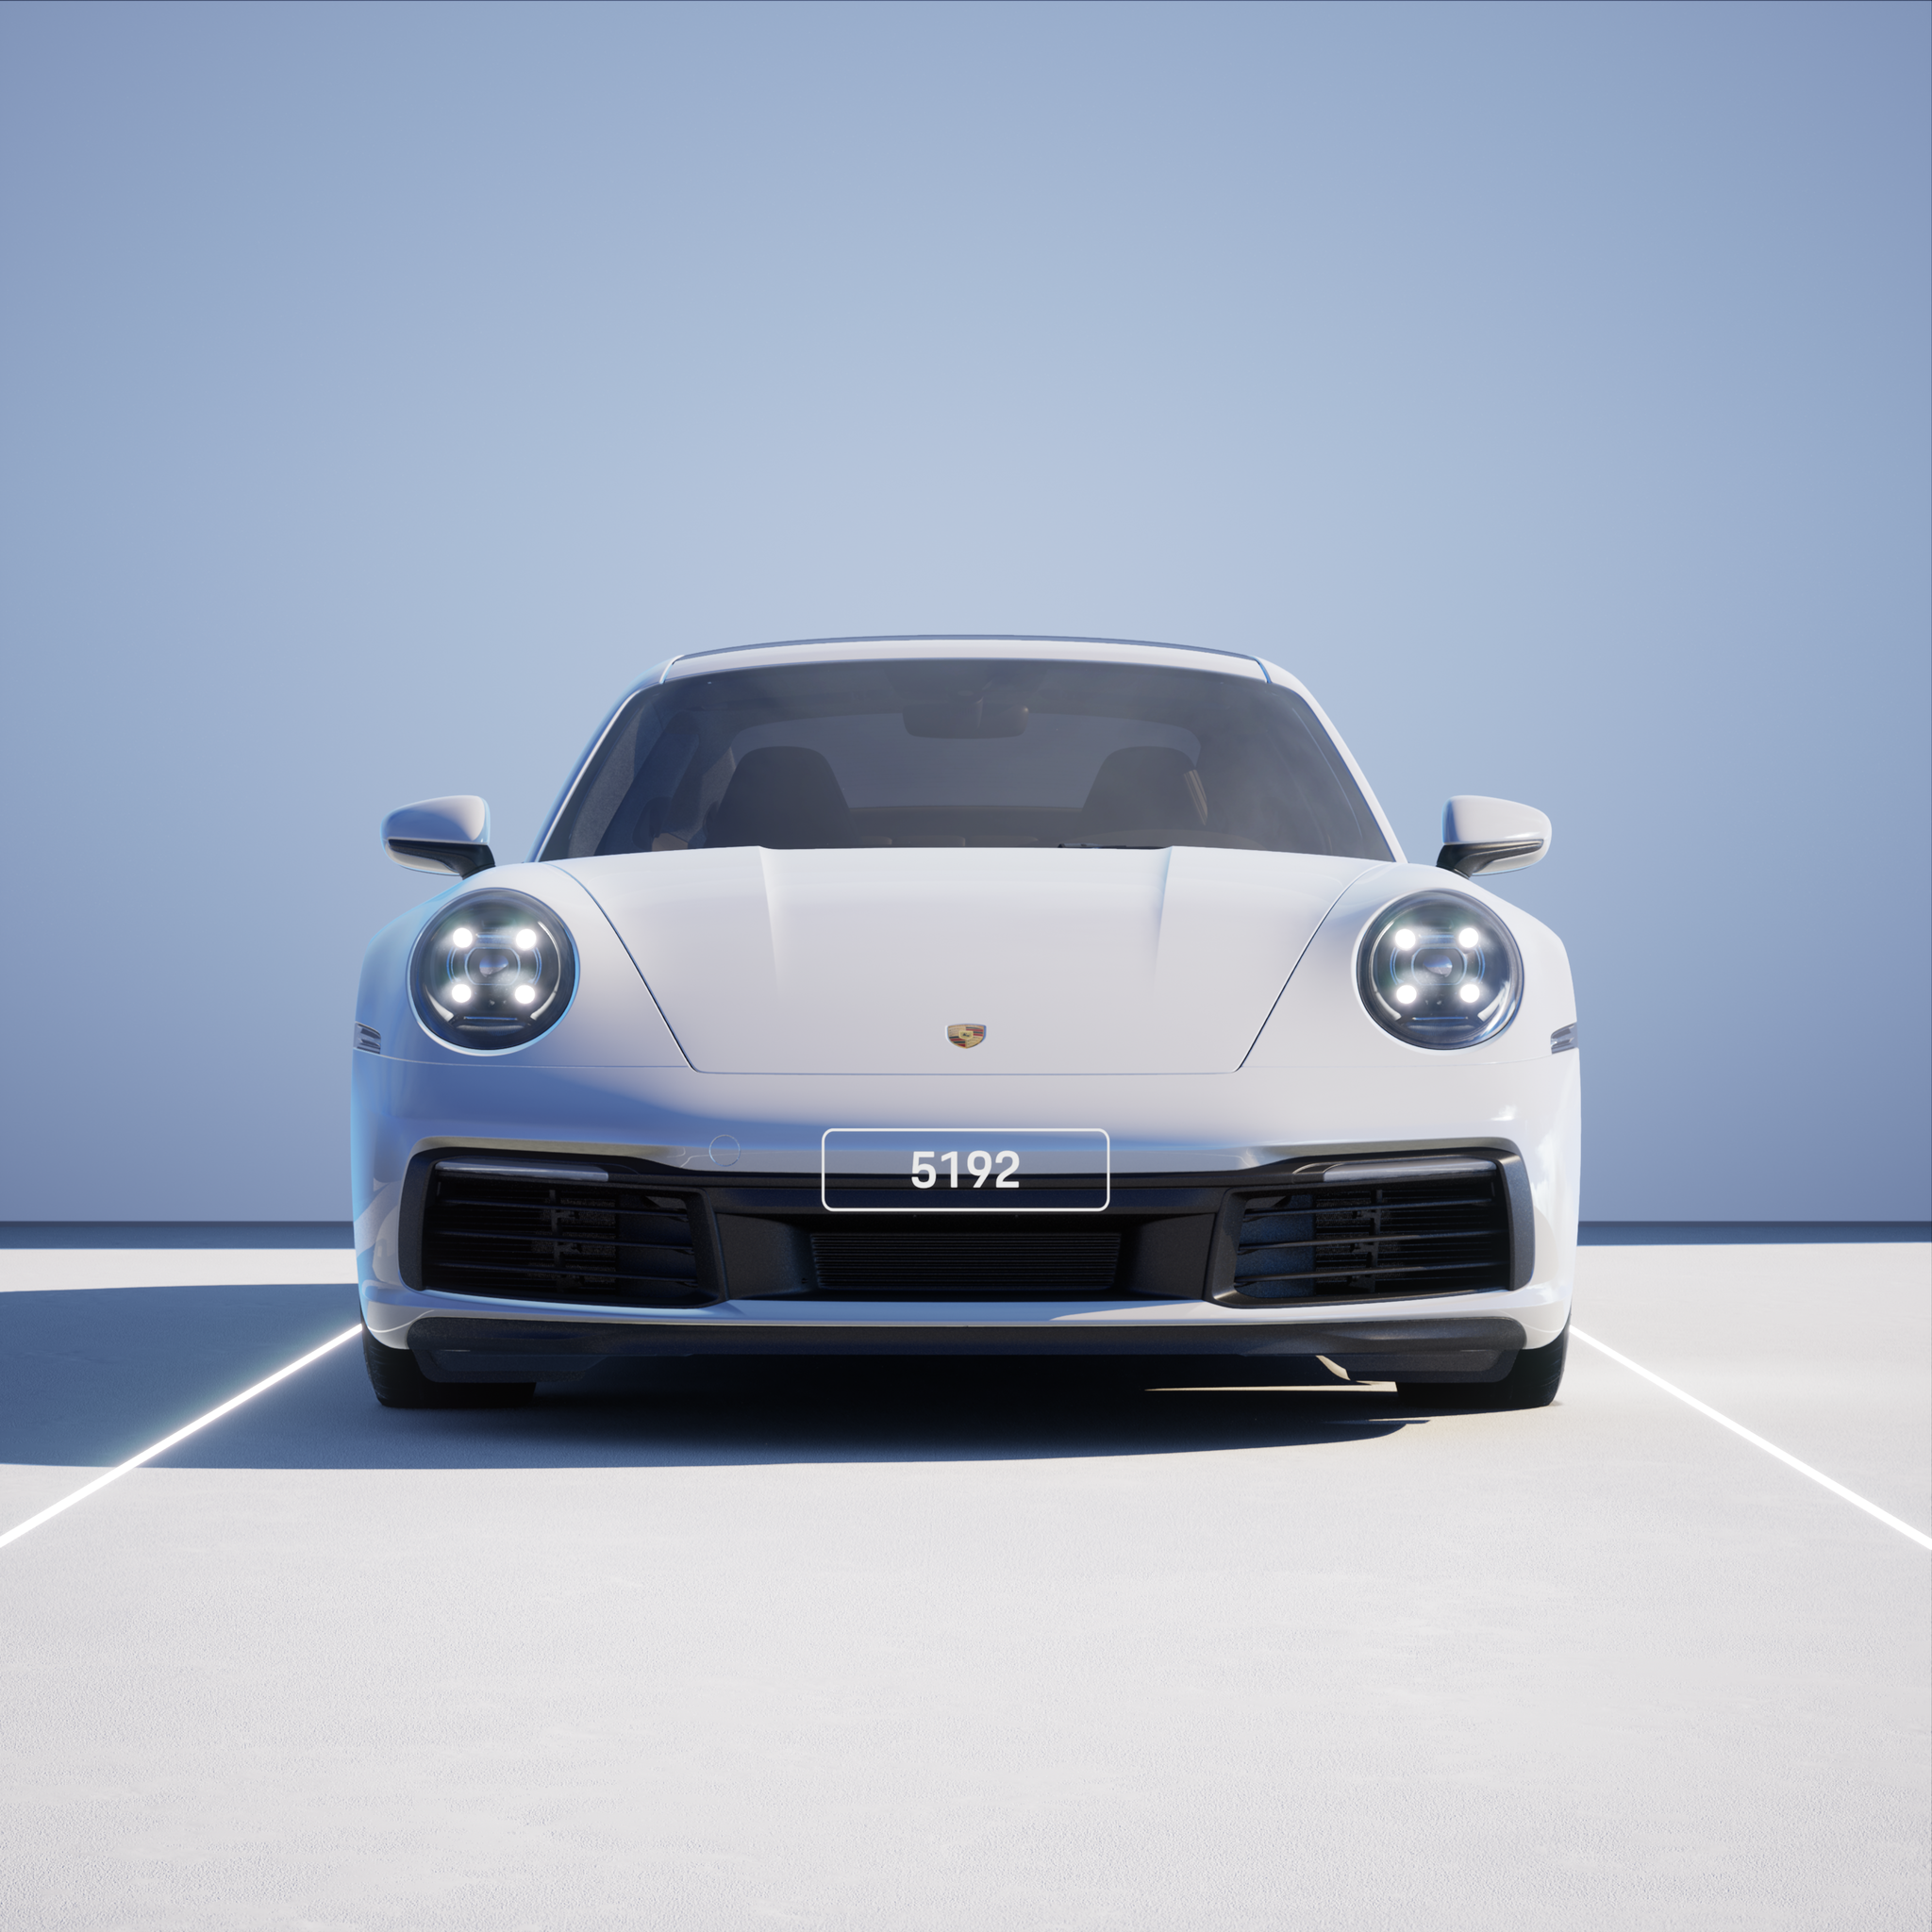 The PORSCHΞ 911 5192 image in phase